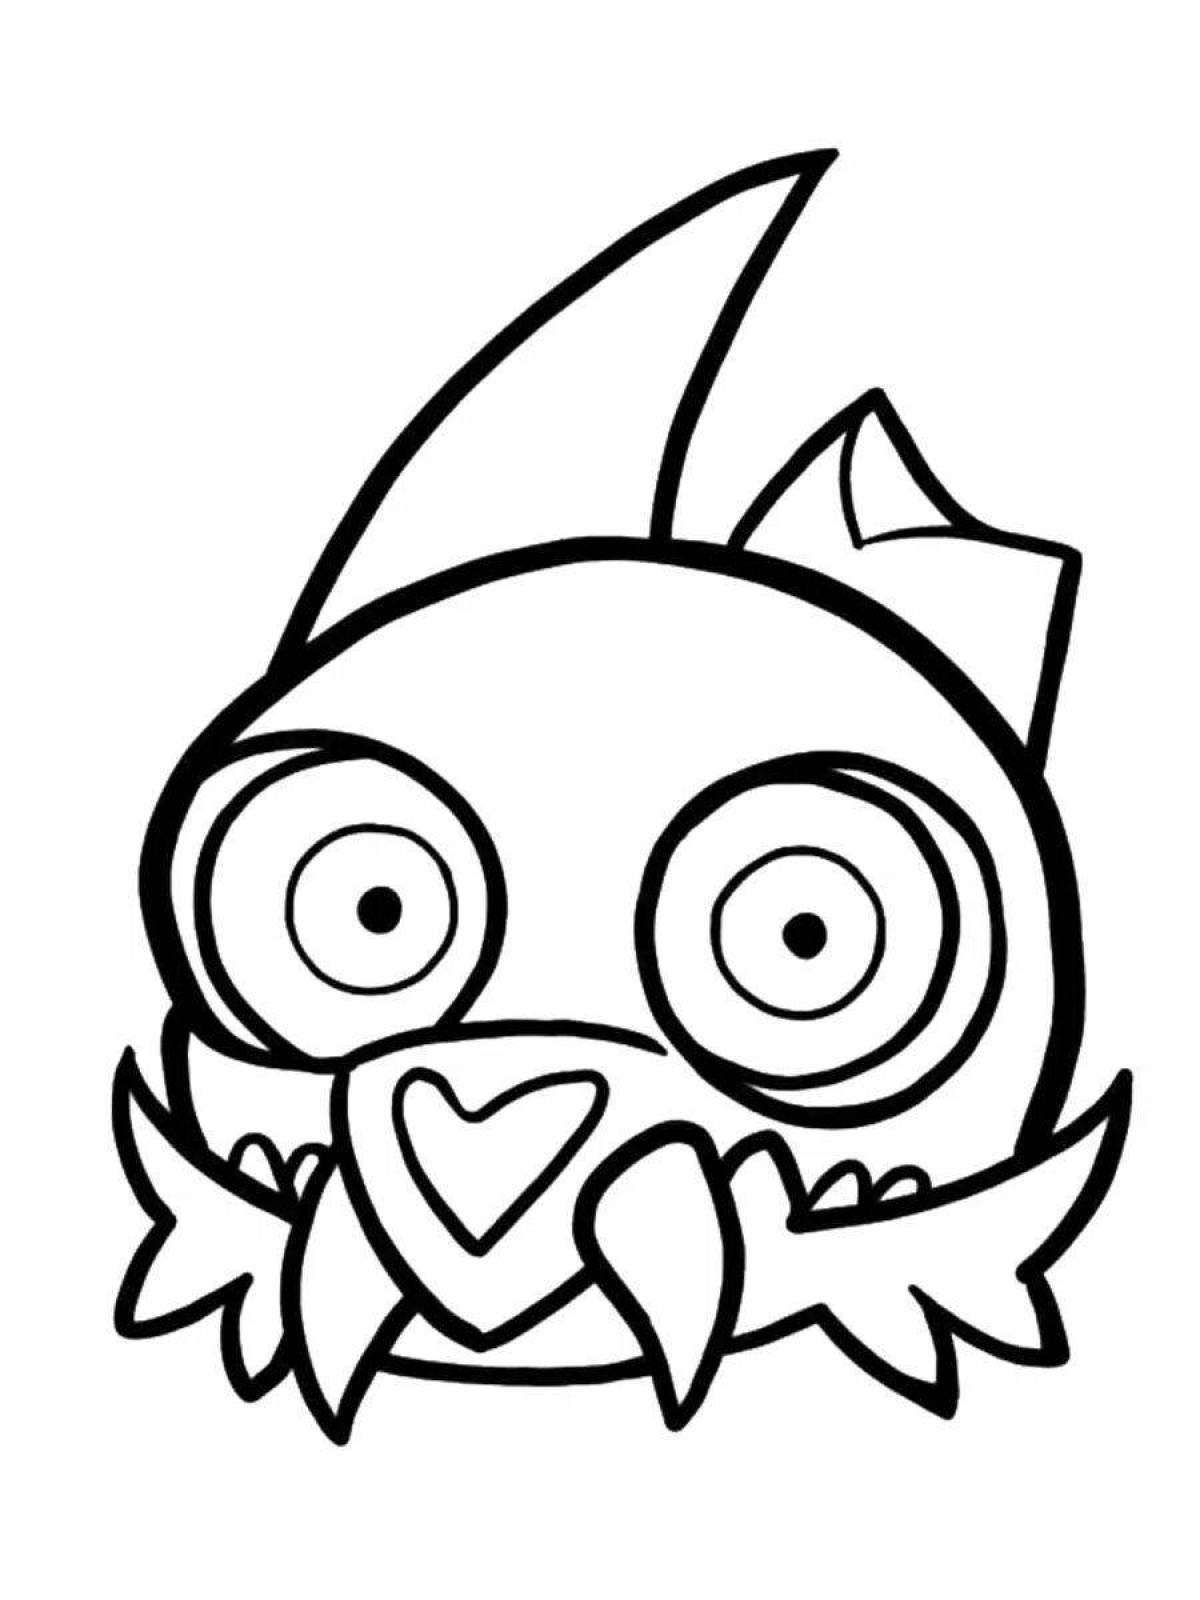 Color explosion amity owl house coloring page